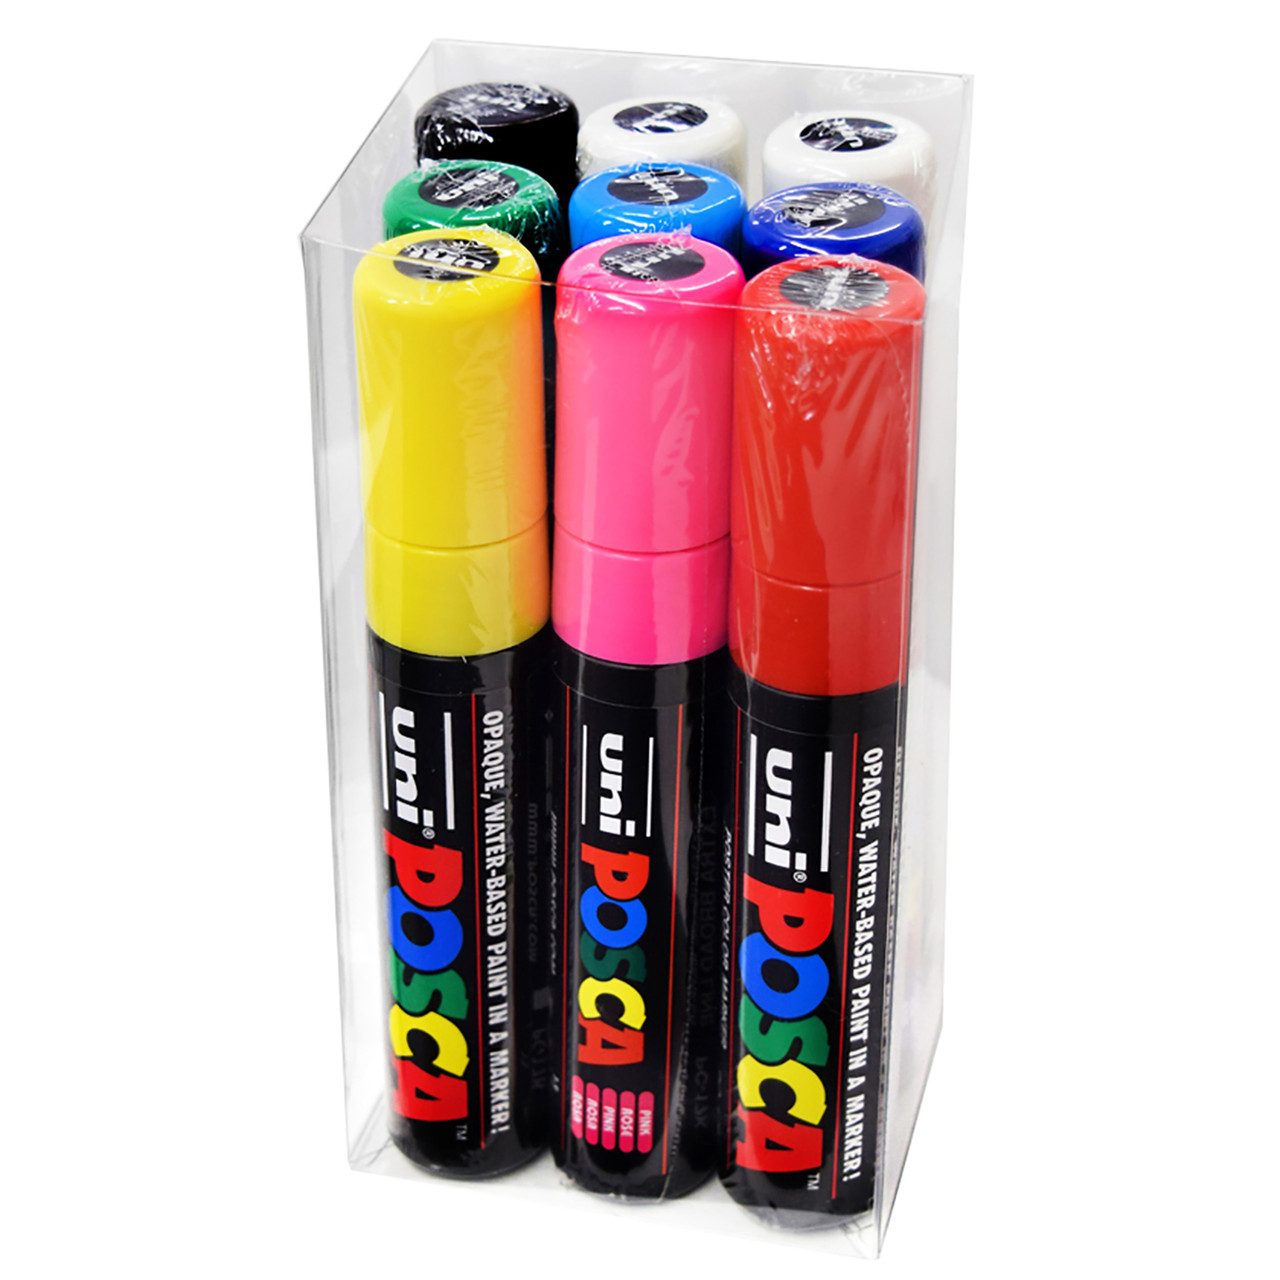 Uni Posca Black Board Marker -Thick Point-6 Colors Set (PCE50017K6C) From  Japan